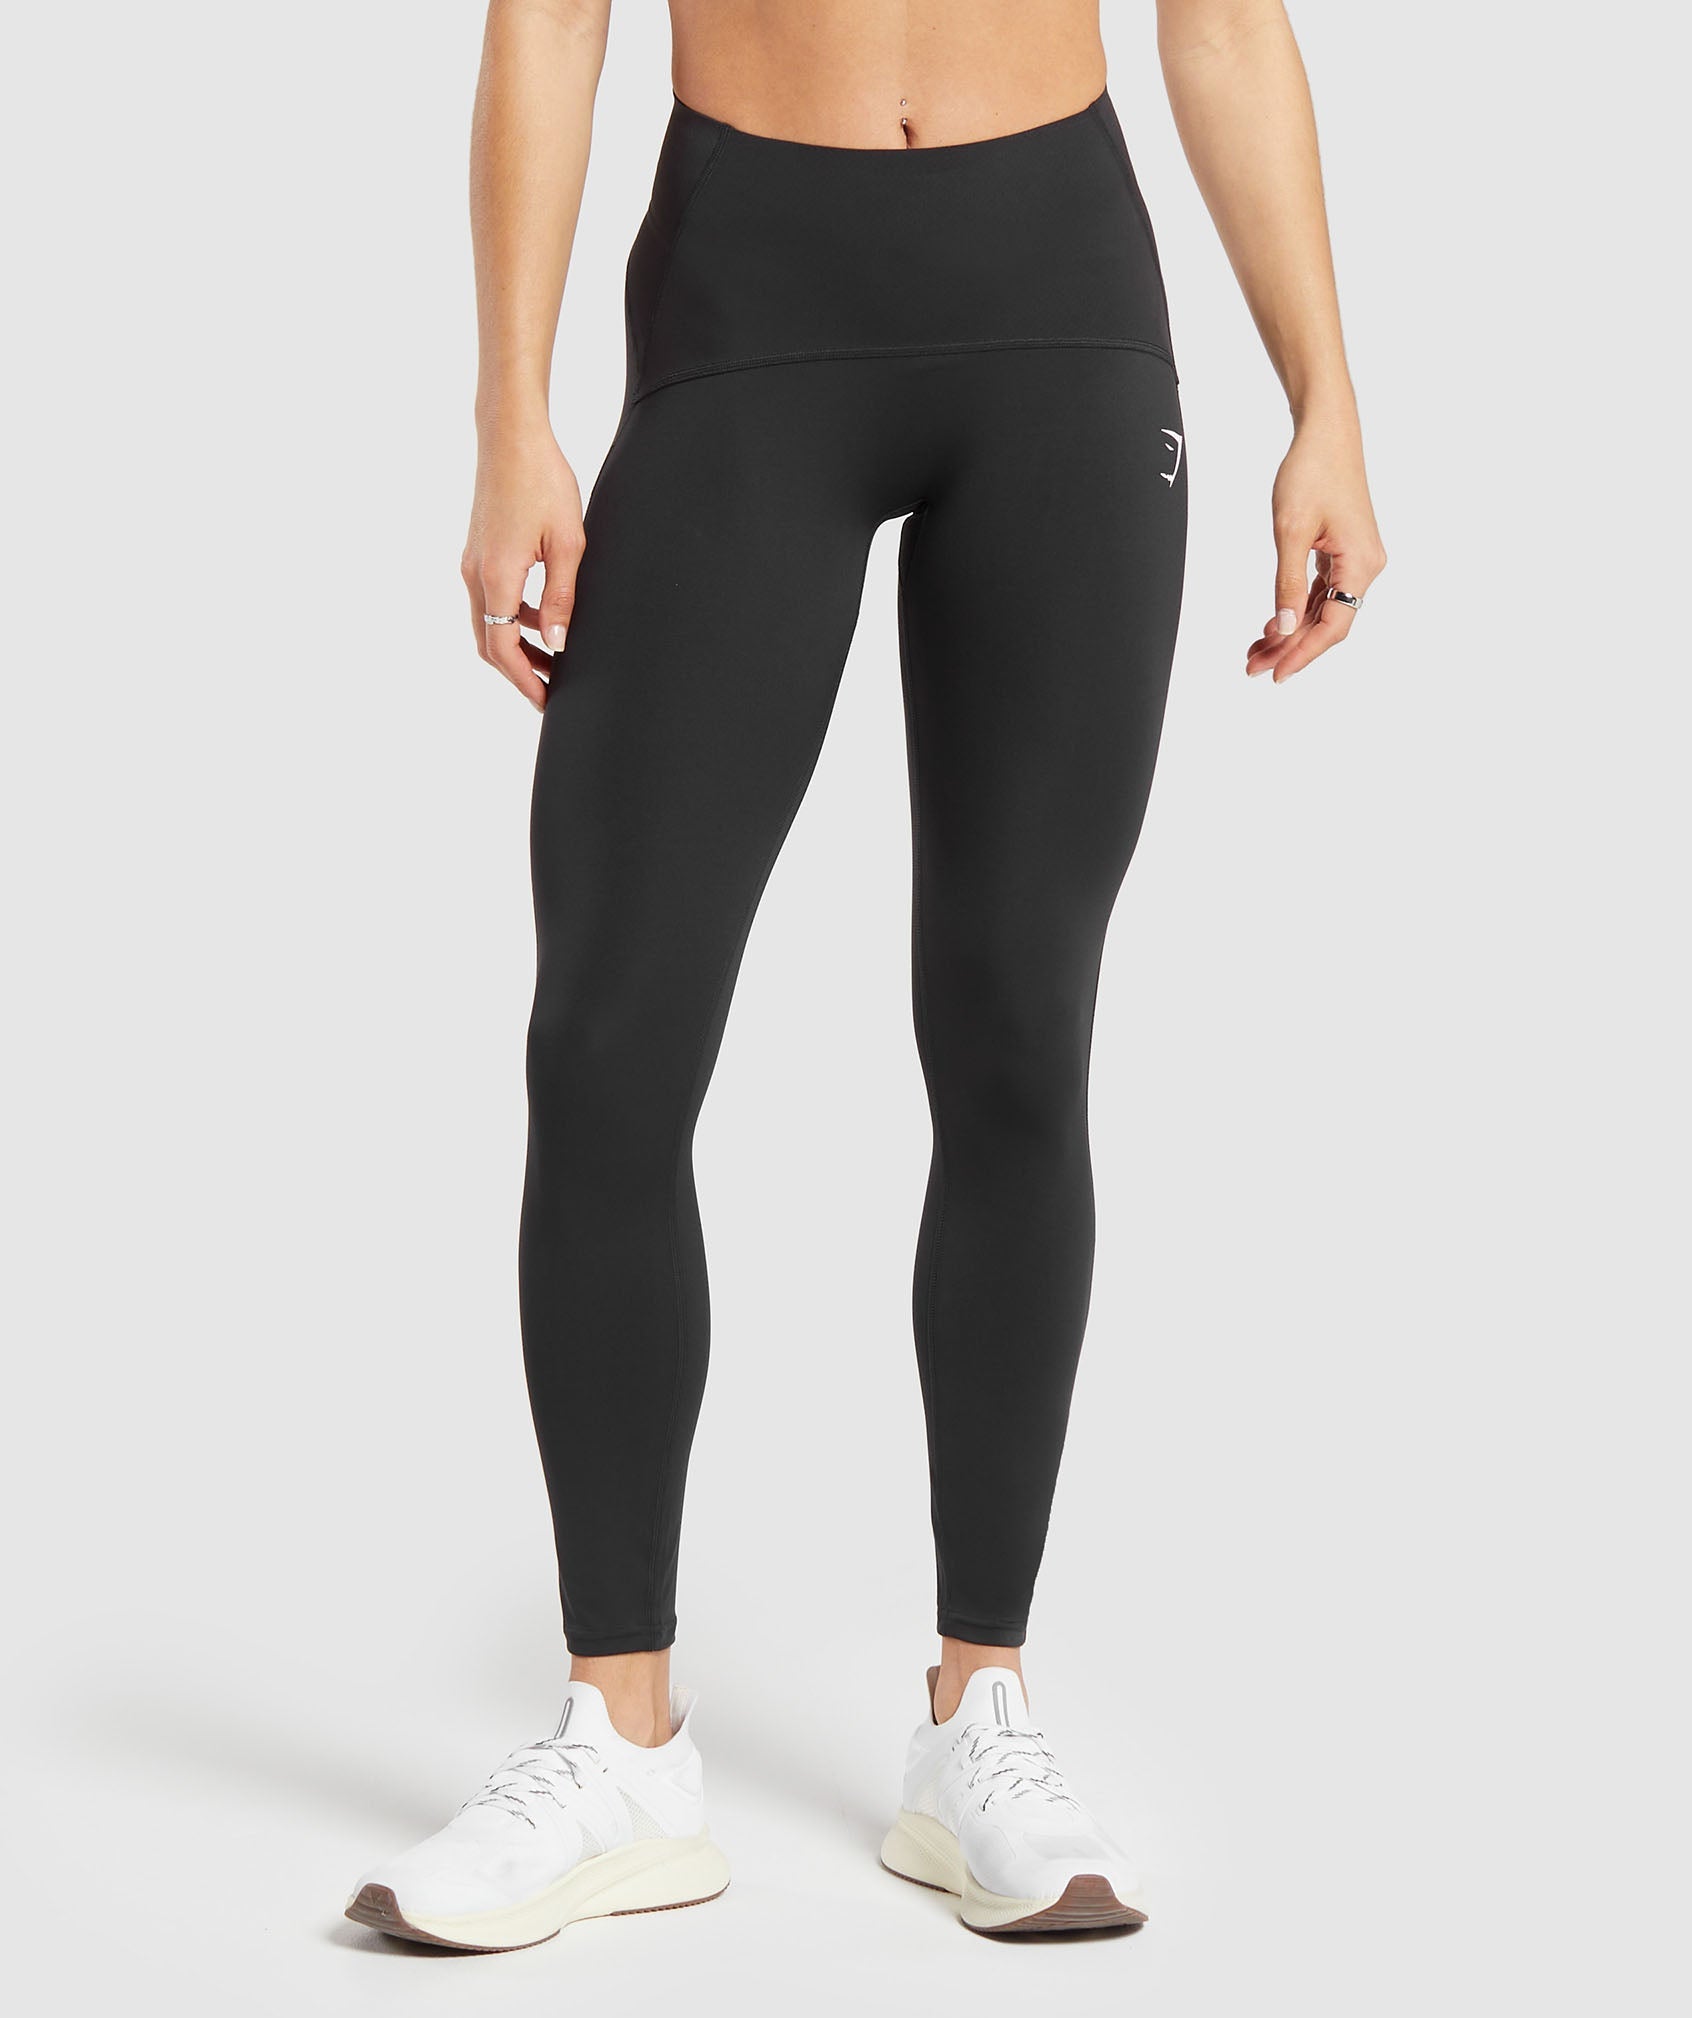 Waist Support Leggings in {{variantColor} is out of stock